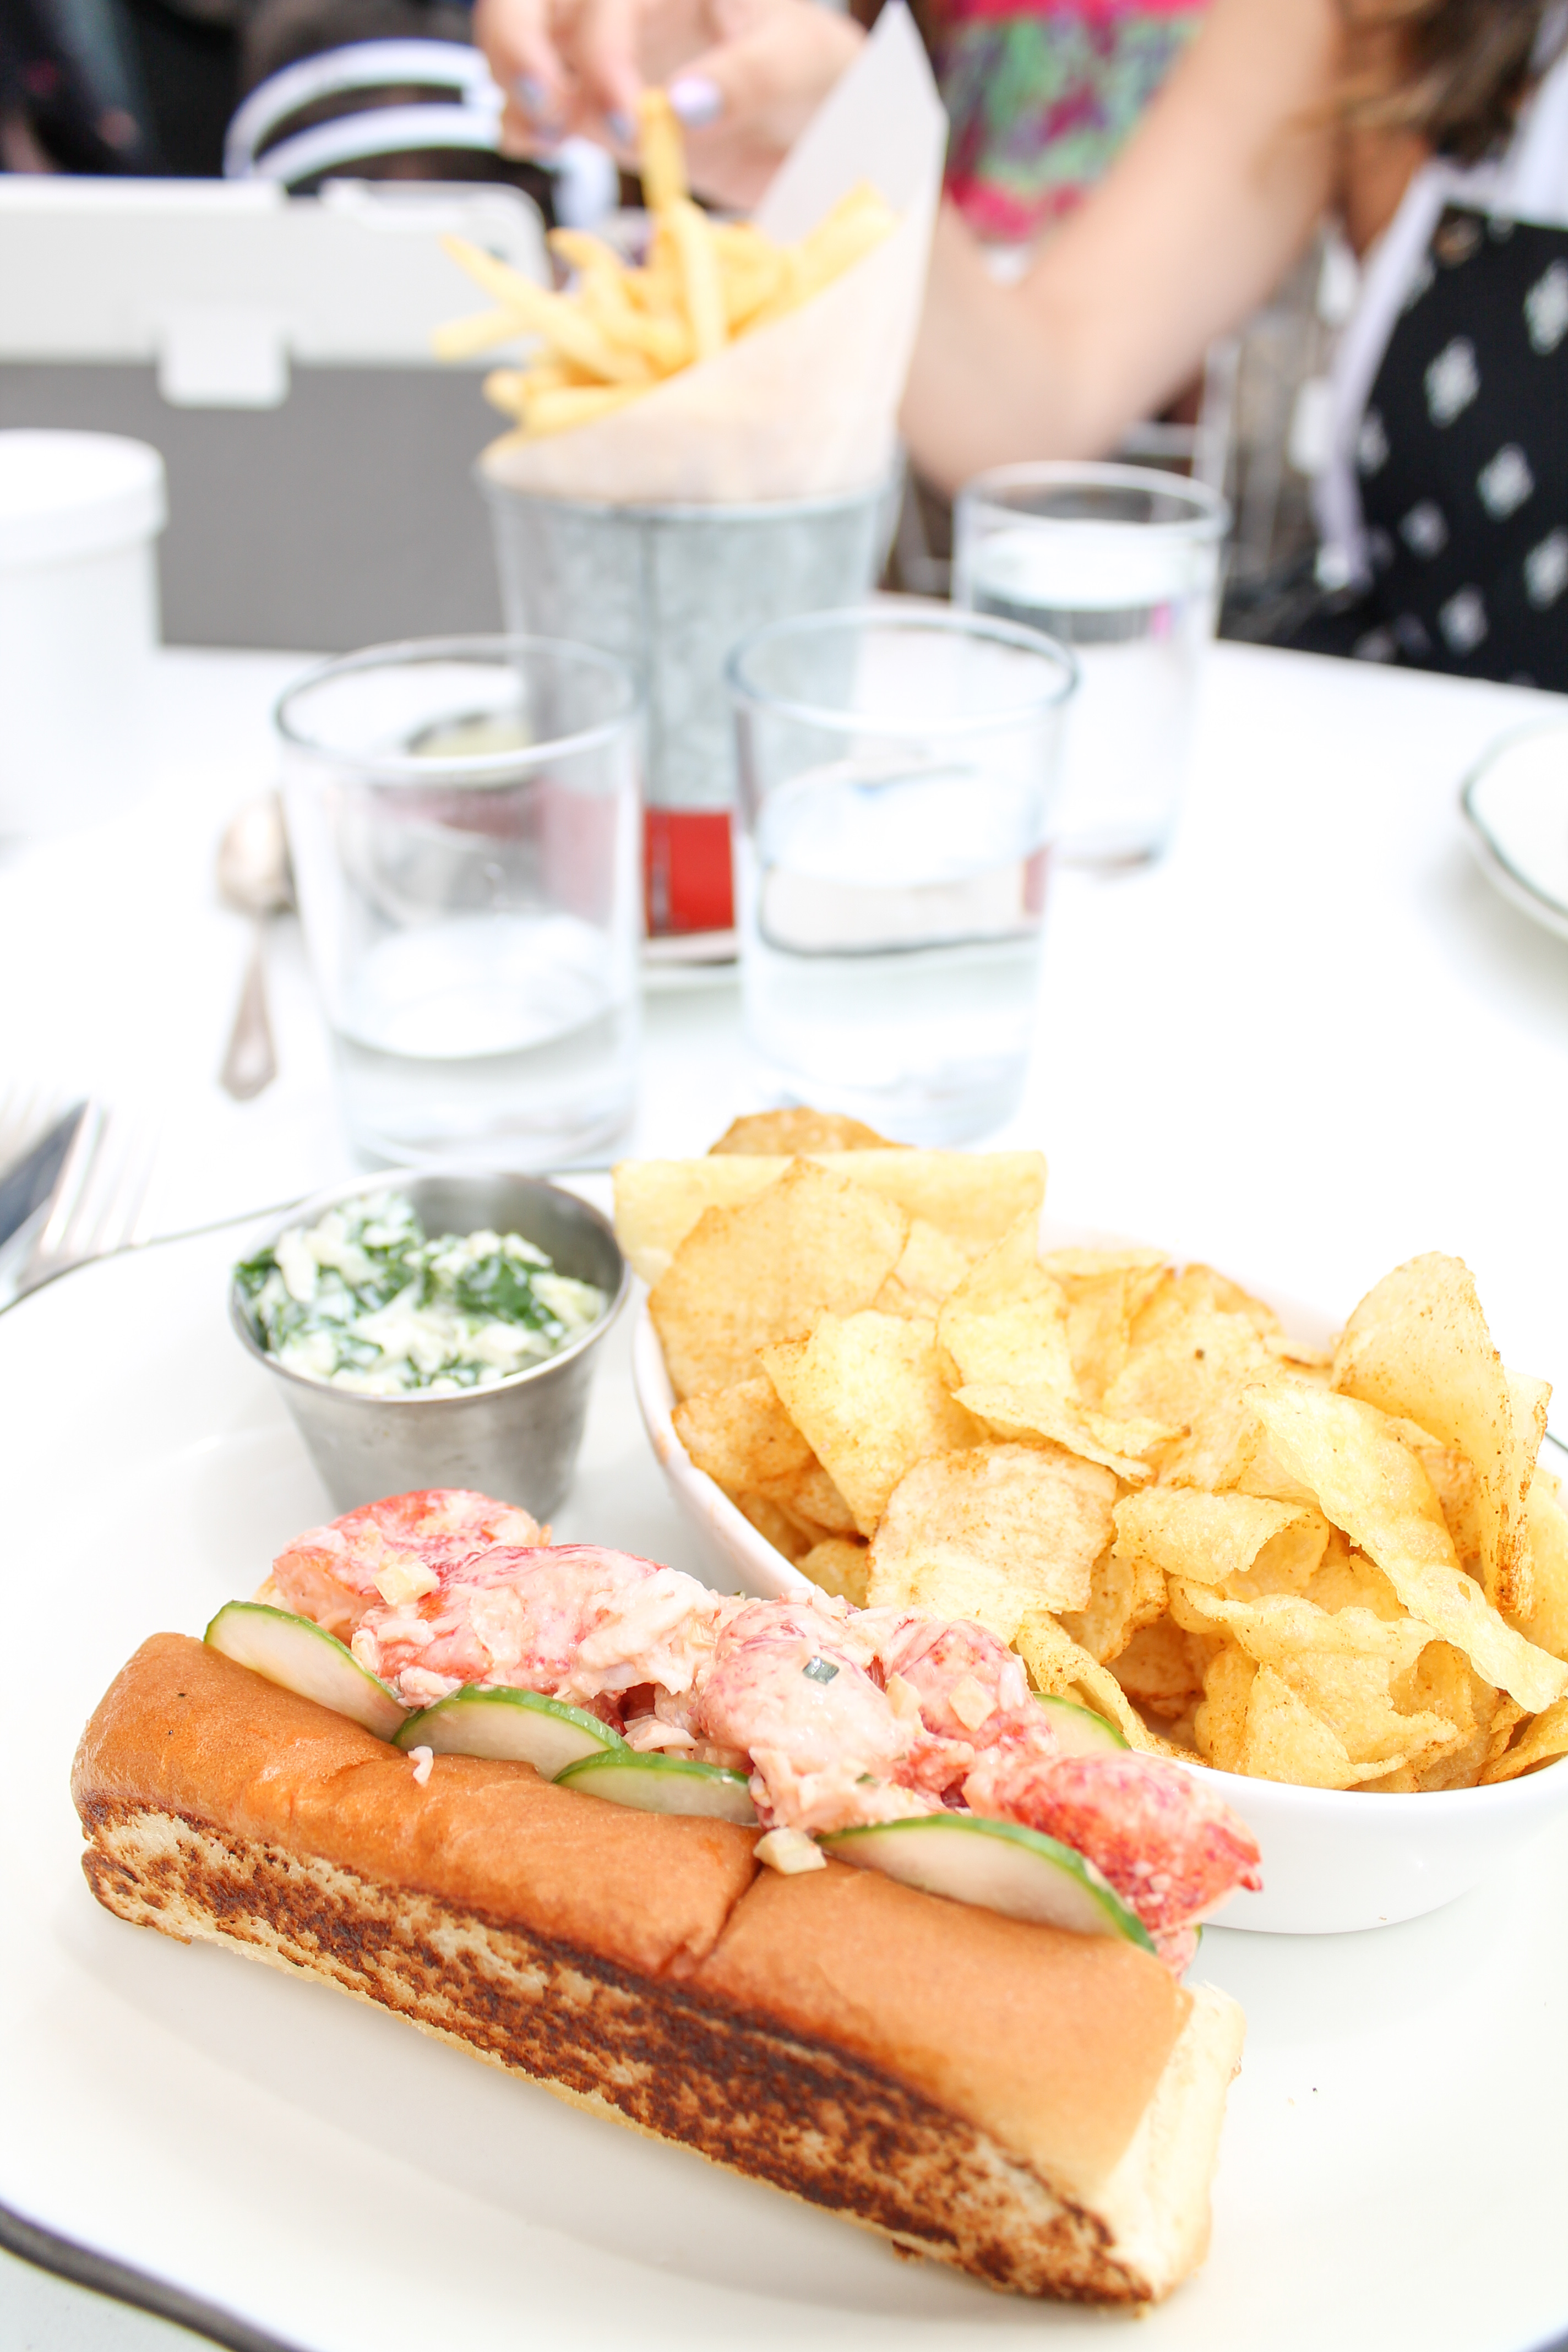 A must read! An NYC restaurant guide featuring all of New York City's best restaurants, from brunch to late night dinners. It even details key dishes to try at each restaurant! Grand Banks is on the list!